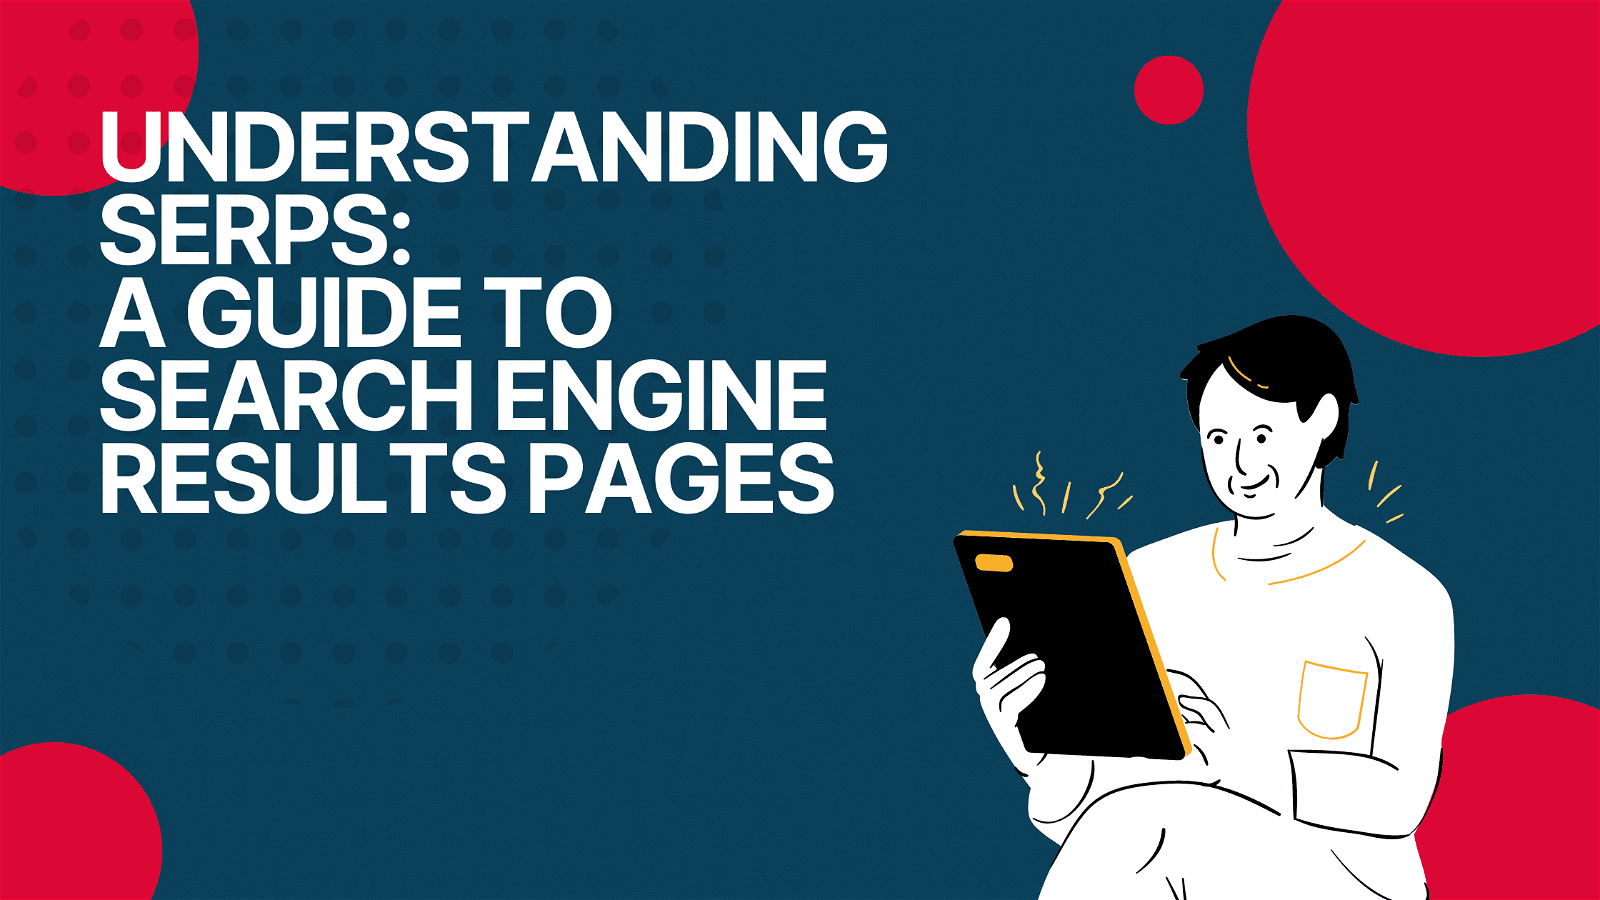 This image is providing a guide to understanding Search Engine Results Pages (SERPs).